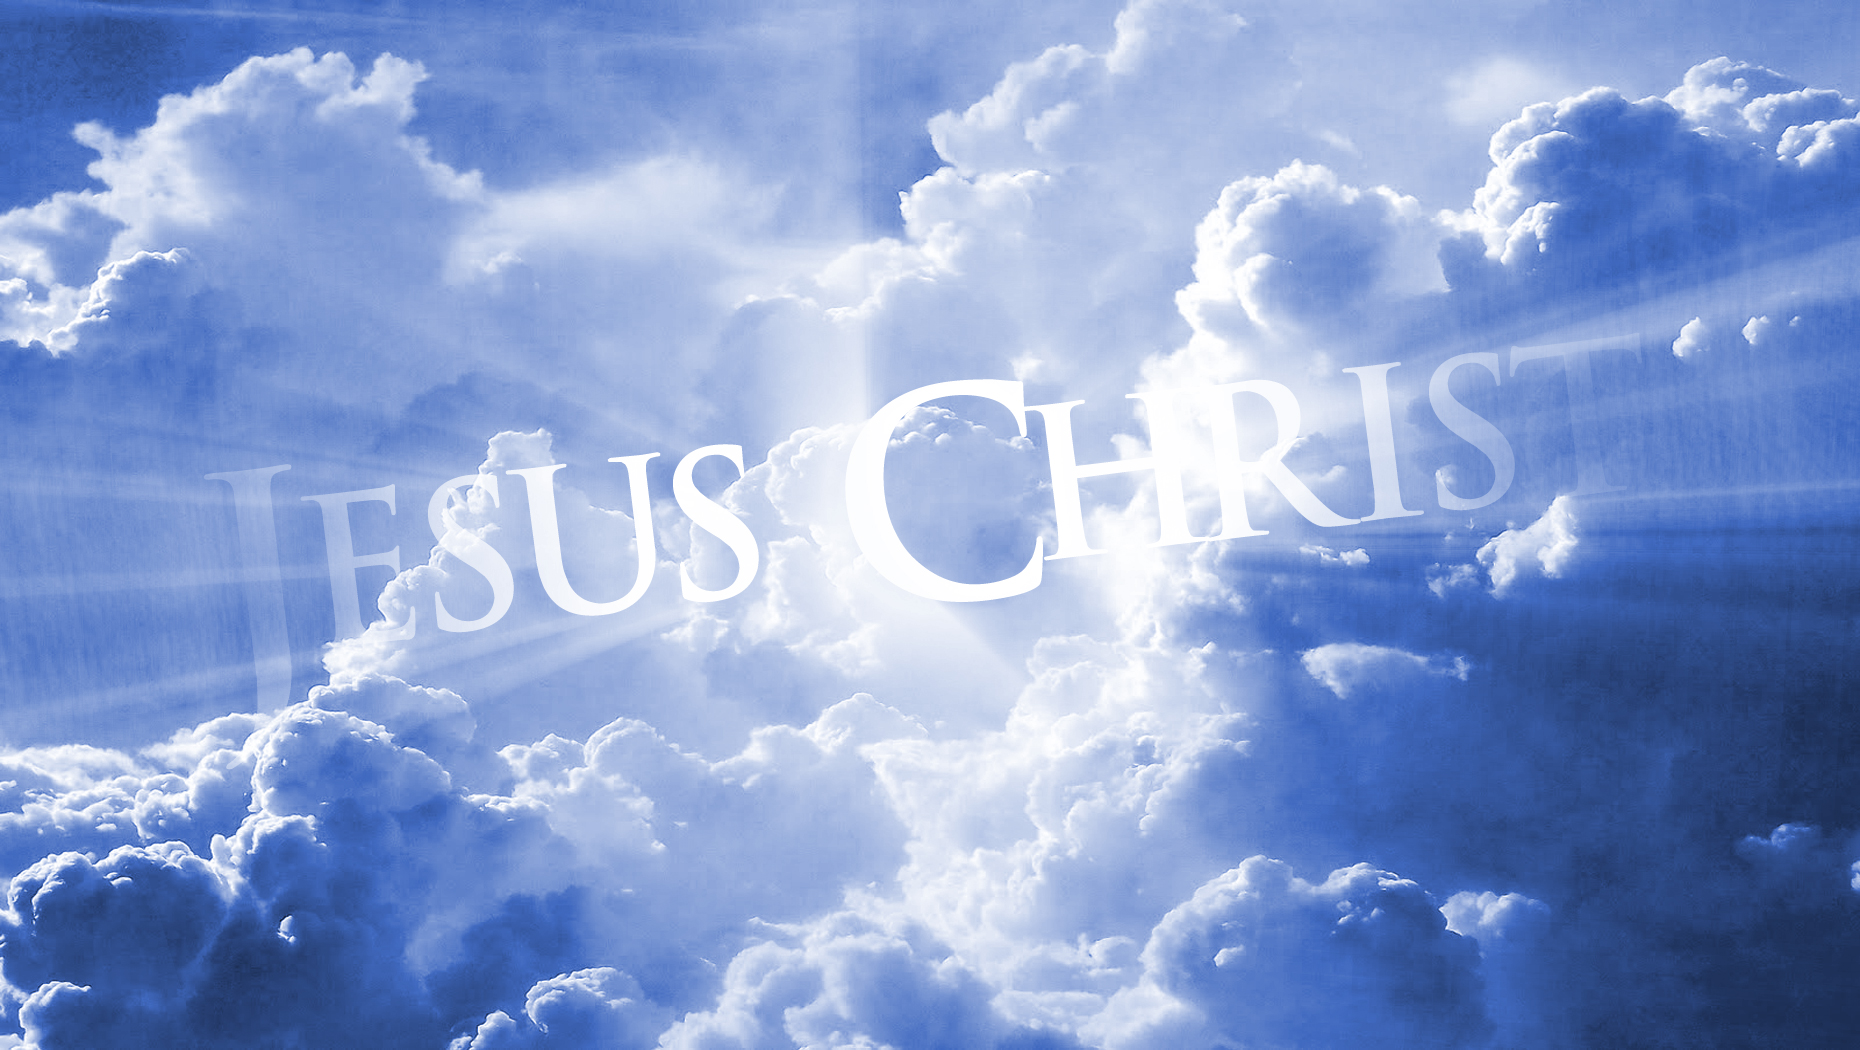 Christian Wallpaper For iPhone Walk With Jesus Online